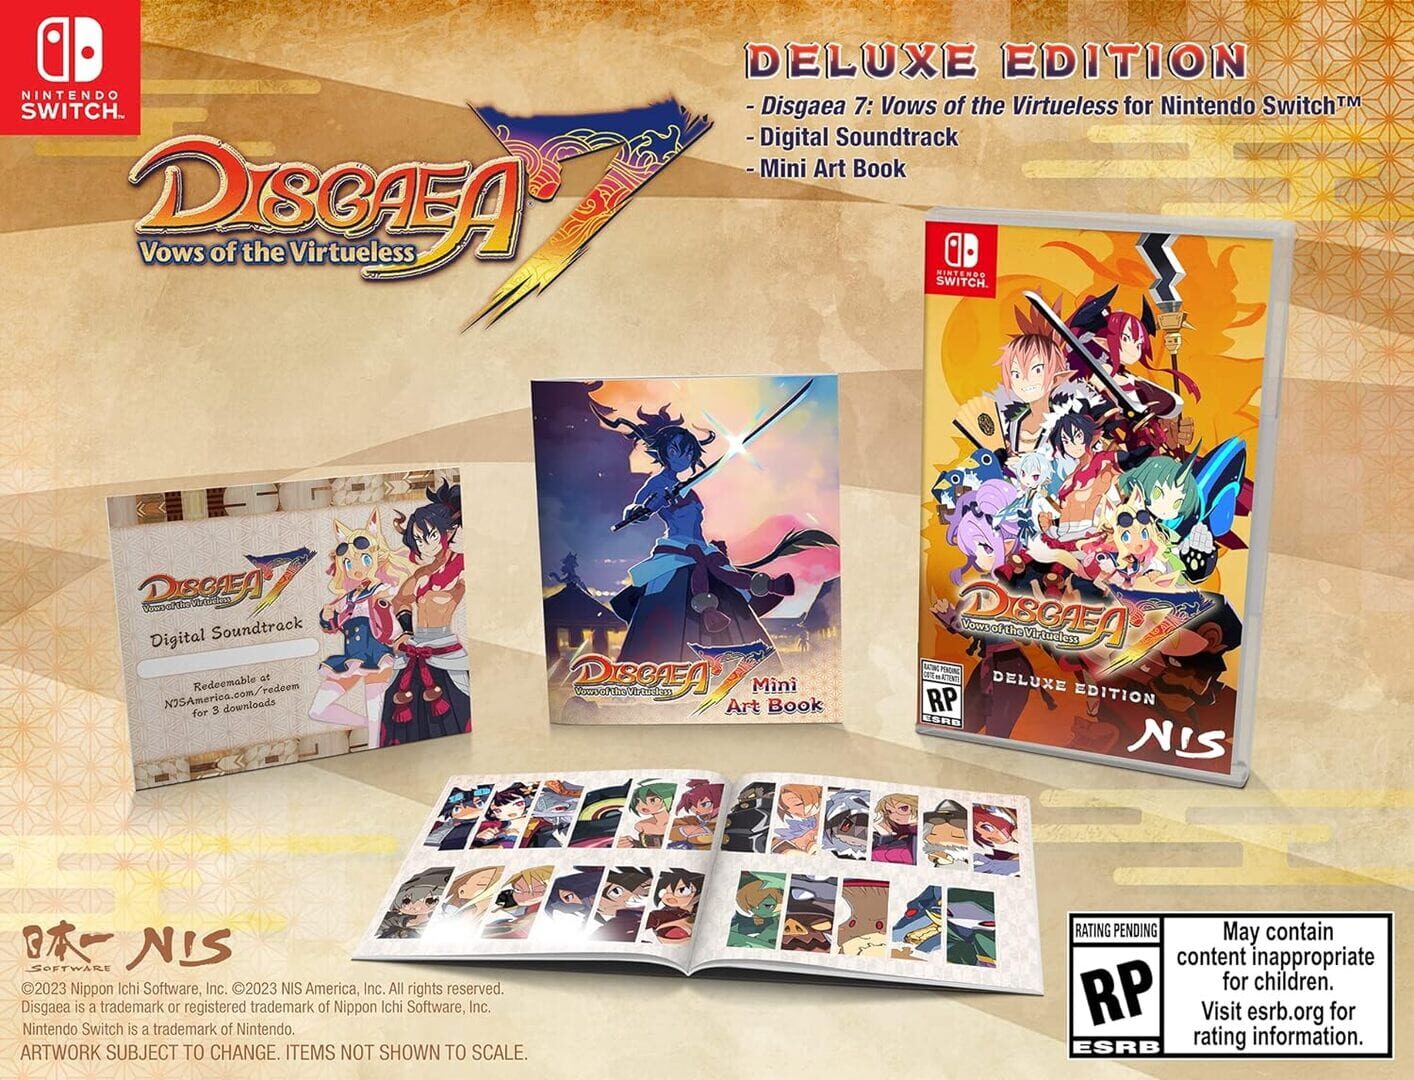 Disgaea 7: Vows of the Virtueless - Deluxe Edition artwork